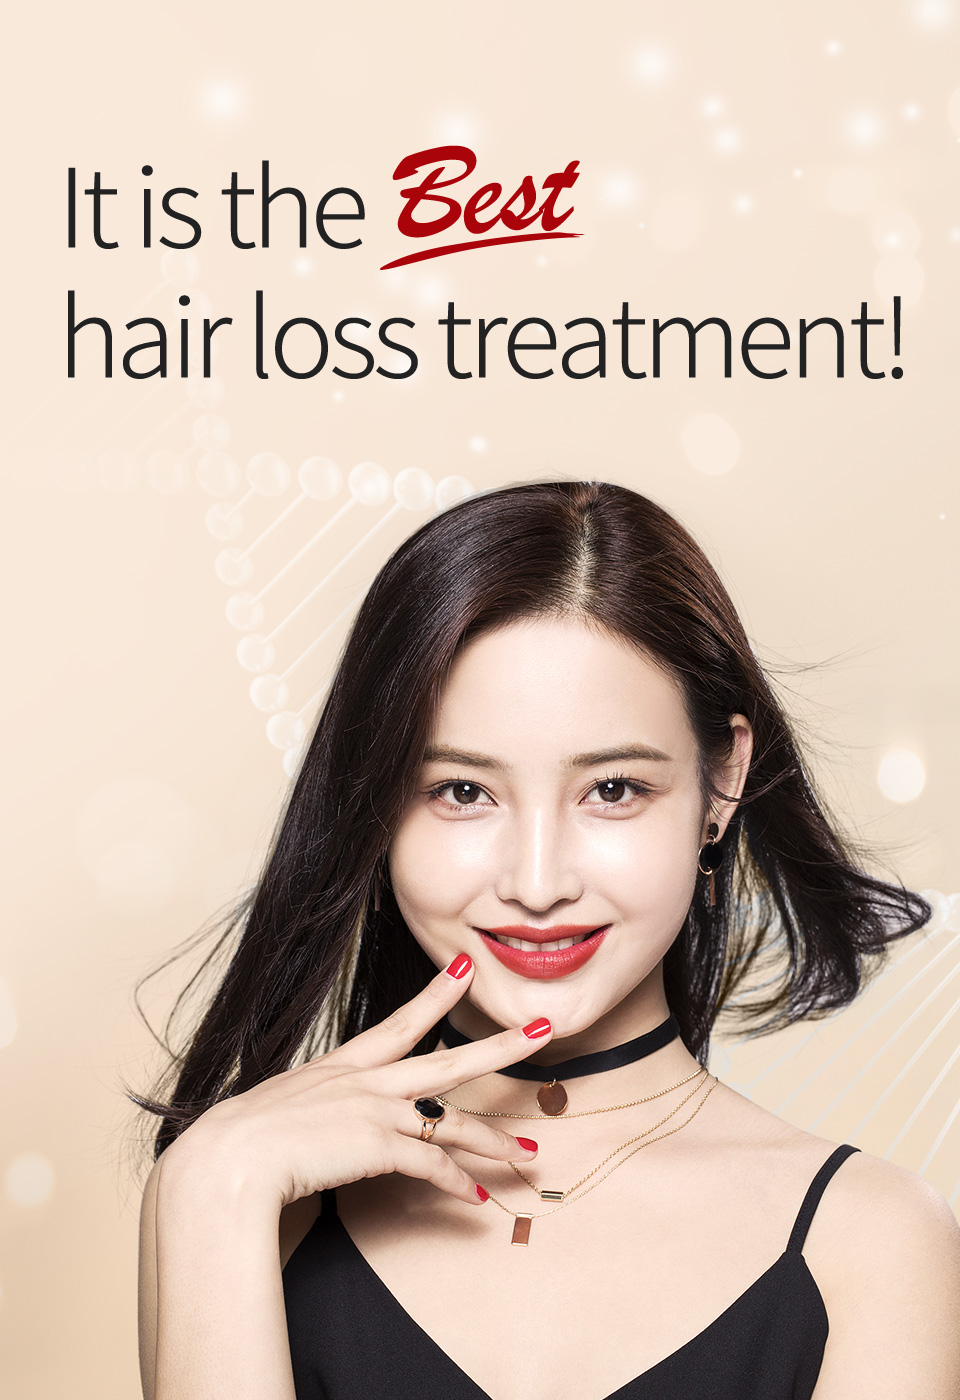 It is the best hair loss treatment!